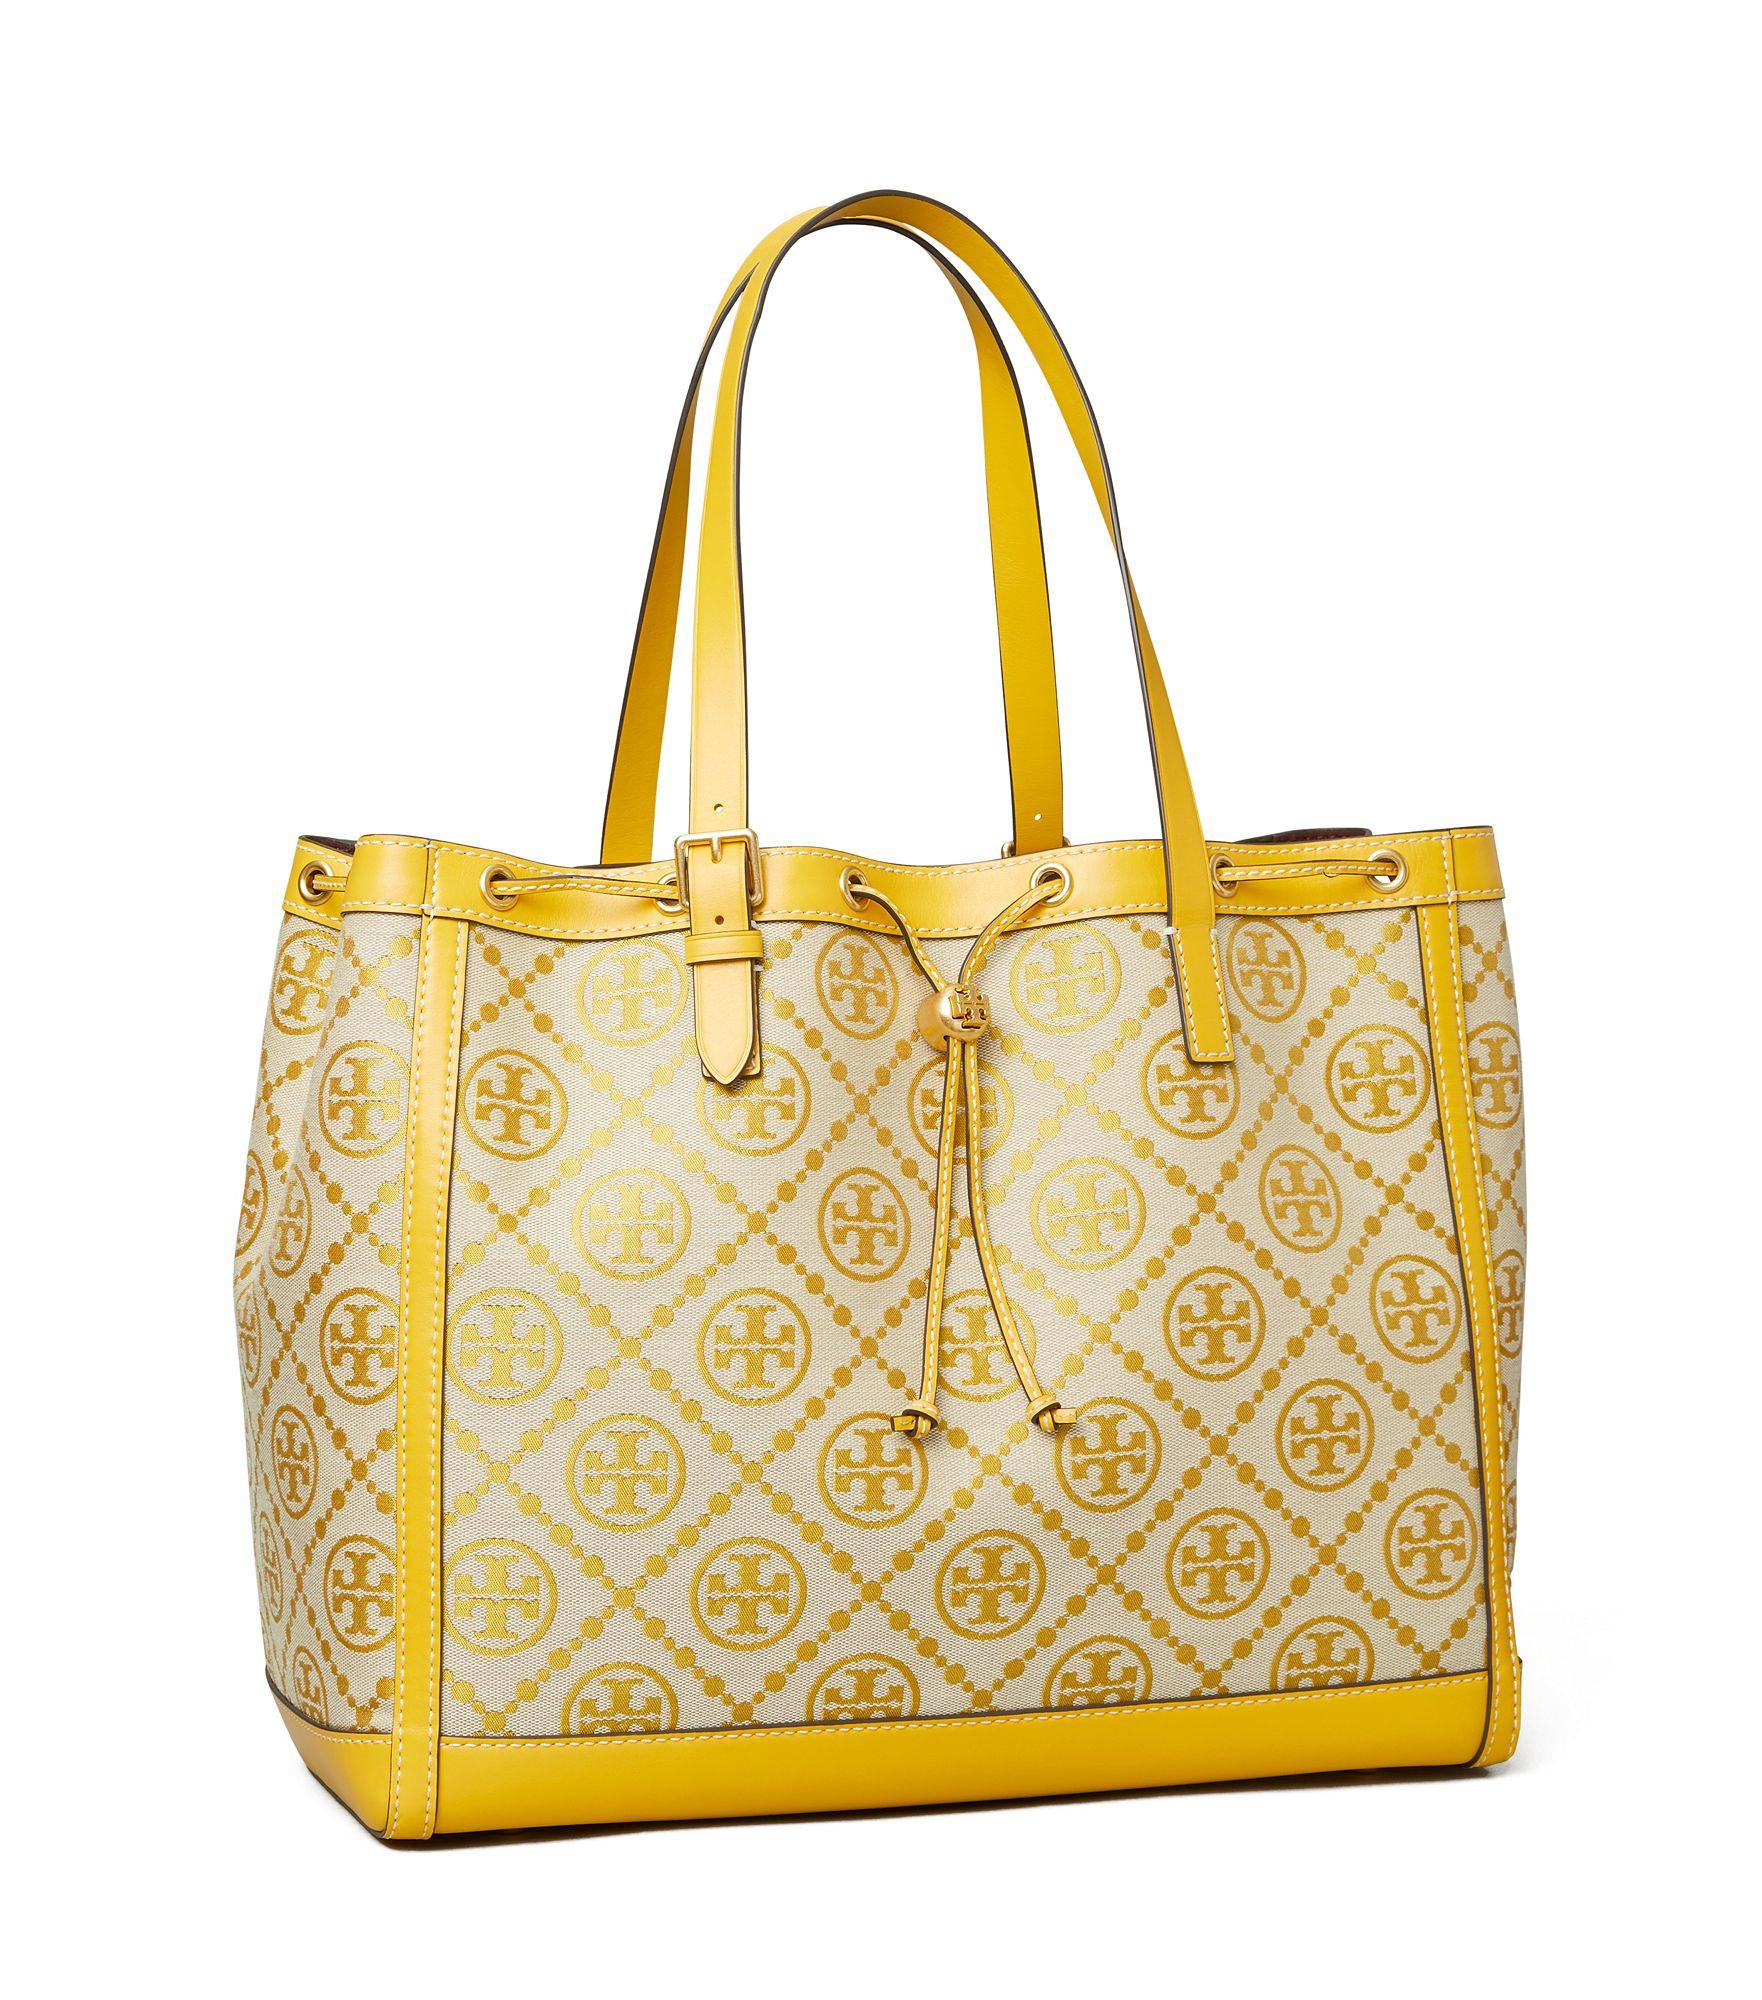 Tory Burch Leather T Monogram Jacquard Tote Bag | Lyst